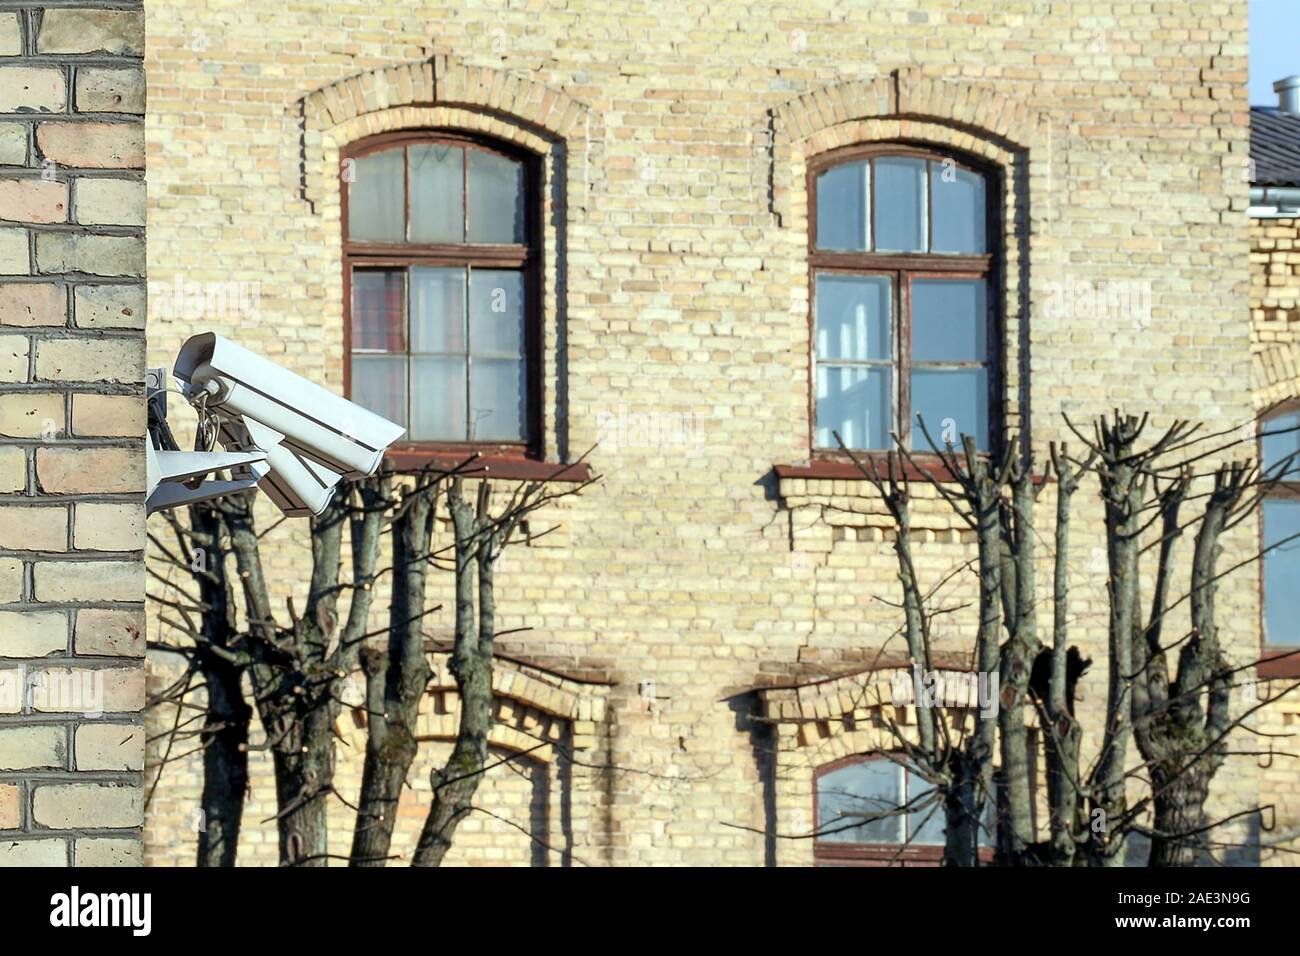 Surveillance cameras on the corner of building, Surveillance of the public  using CCTV is common in many areas around the world Stock Photo - Alamy